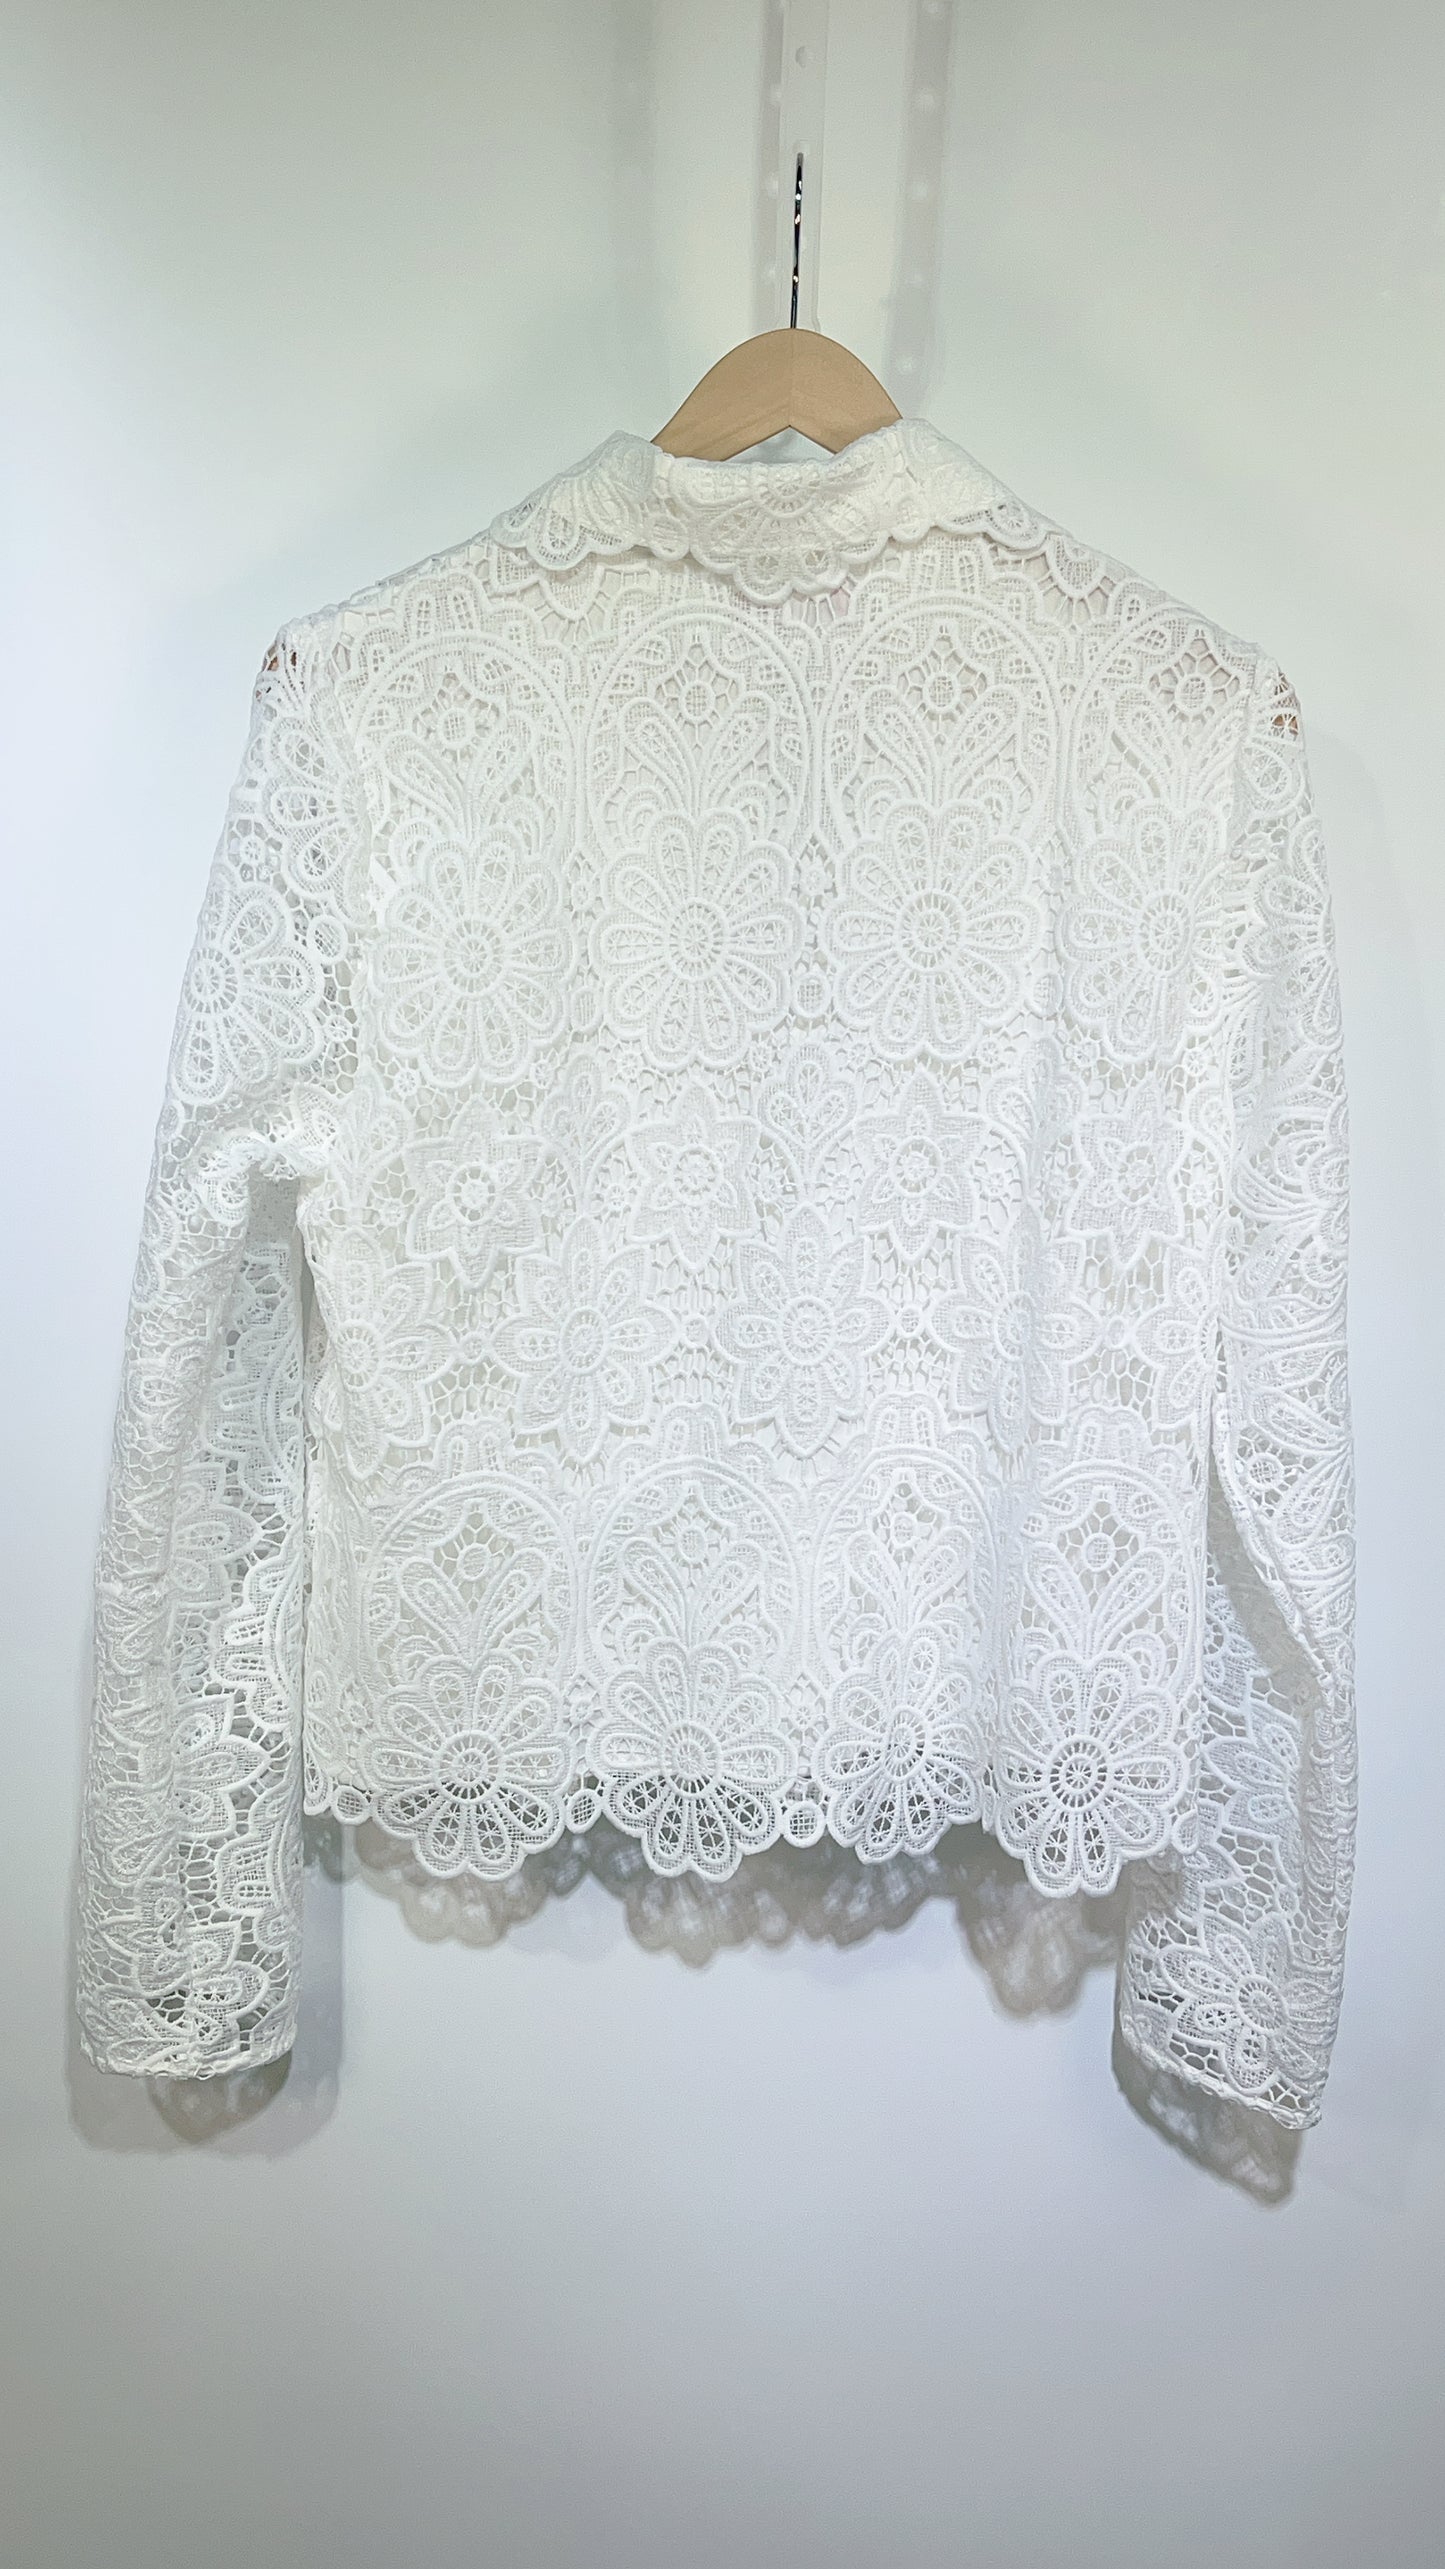 Lace shirt with long sleeve